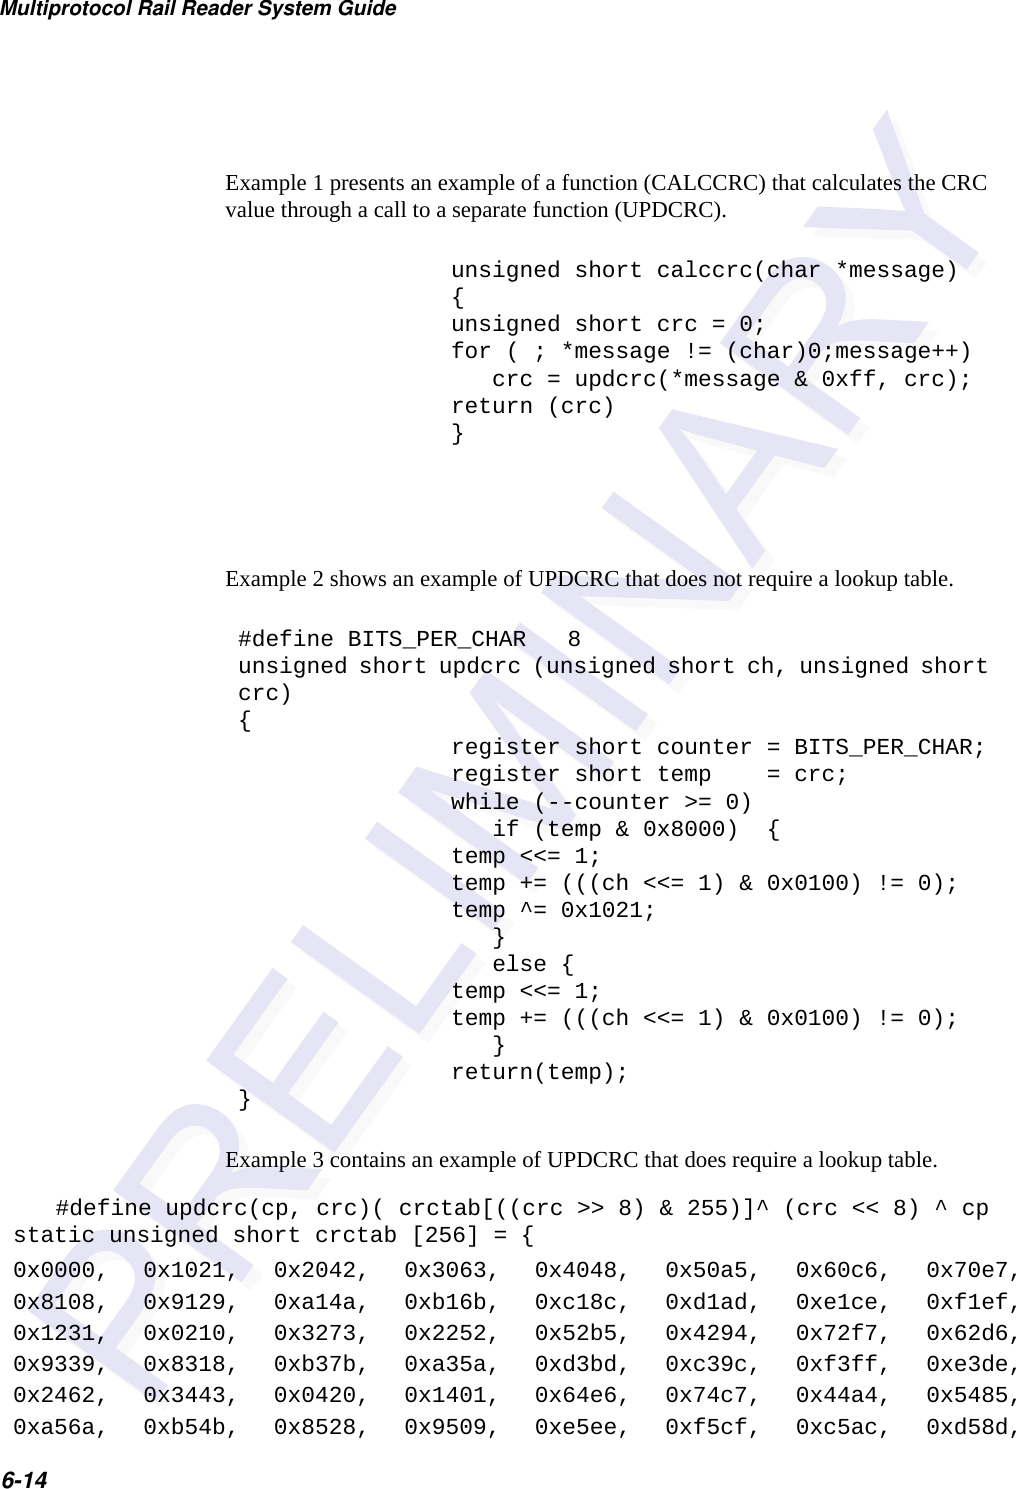 Multiprotocol Rail Reader System Guide6-14Example 3 contains an example of UPDCRC that does require a lookup table. Example 1 presents an example of a function (CALCCRC) that calculates the CRC value through a call to a separate function (UPDCRC).unsigned short calccrc(char *message){unsigned short crc = 0;for ( ; *message != (char)0;message++)   crc = updcrc(*message &amp; 0xff, crc);return (crc)}Example 2 shows an example of UPDCRC that does not require a lookup table.#define BITS_PER_CHAR   8unsigned short updcrc (unsigned short ch, unsigned short crc){register short counter = BITS_PER_CHAR;register short temp    = crc;while (--counter &gt;= 0)   if (temp &amp; 0x8000)  {temp &lt;&lt;= 1;temp += (((ch &lt;&lt;= 1) &amp; 0x0100) != 0);temp ^= 0x1021;   }   else {temp &lt;&lt;= 1;temp += (((ch &lt;&lt;= 1) &amp; 0x0100) != 0);   }return(temp);}#define updcrc(cp, crc)( crctab[((crc &gt;&gt; 8) &amp; 255)]^ (crc &lt;&lt; 8) ^ cpstatic unsigned short crctab [256] = {0x0000, 0x1021, 0x2042, 0x3063, 0x4048, 0x50a5, 0x60c6, 0x70e7,0x8108, 0x9129, 0xa14a, 0xb16b, 0xc18c, 0xd1ad, 0xe1ce, 0xf1ef,0x1231, 0x0210, 0x3273, 0x2252, 0x52b5, 0x4294, 0x72f7, 0x62d6,0x9339, 0x8318, 0xb37b, 0xa35a, 0xd3bd, 0xc39c, 0xf3ff, 0xe3de,0x2462, 0x3443, 0x0420, 0x1401, 0x64e6, 0x74c7, 0x44a4, 0x5485,0xa56a, 0xb54b, 0x8528, 0x9509, 0xe5ee, 0xf5cf, 0xc5ac, 0xd58d,